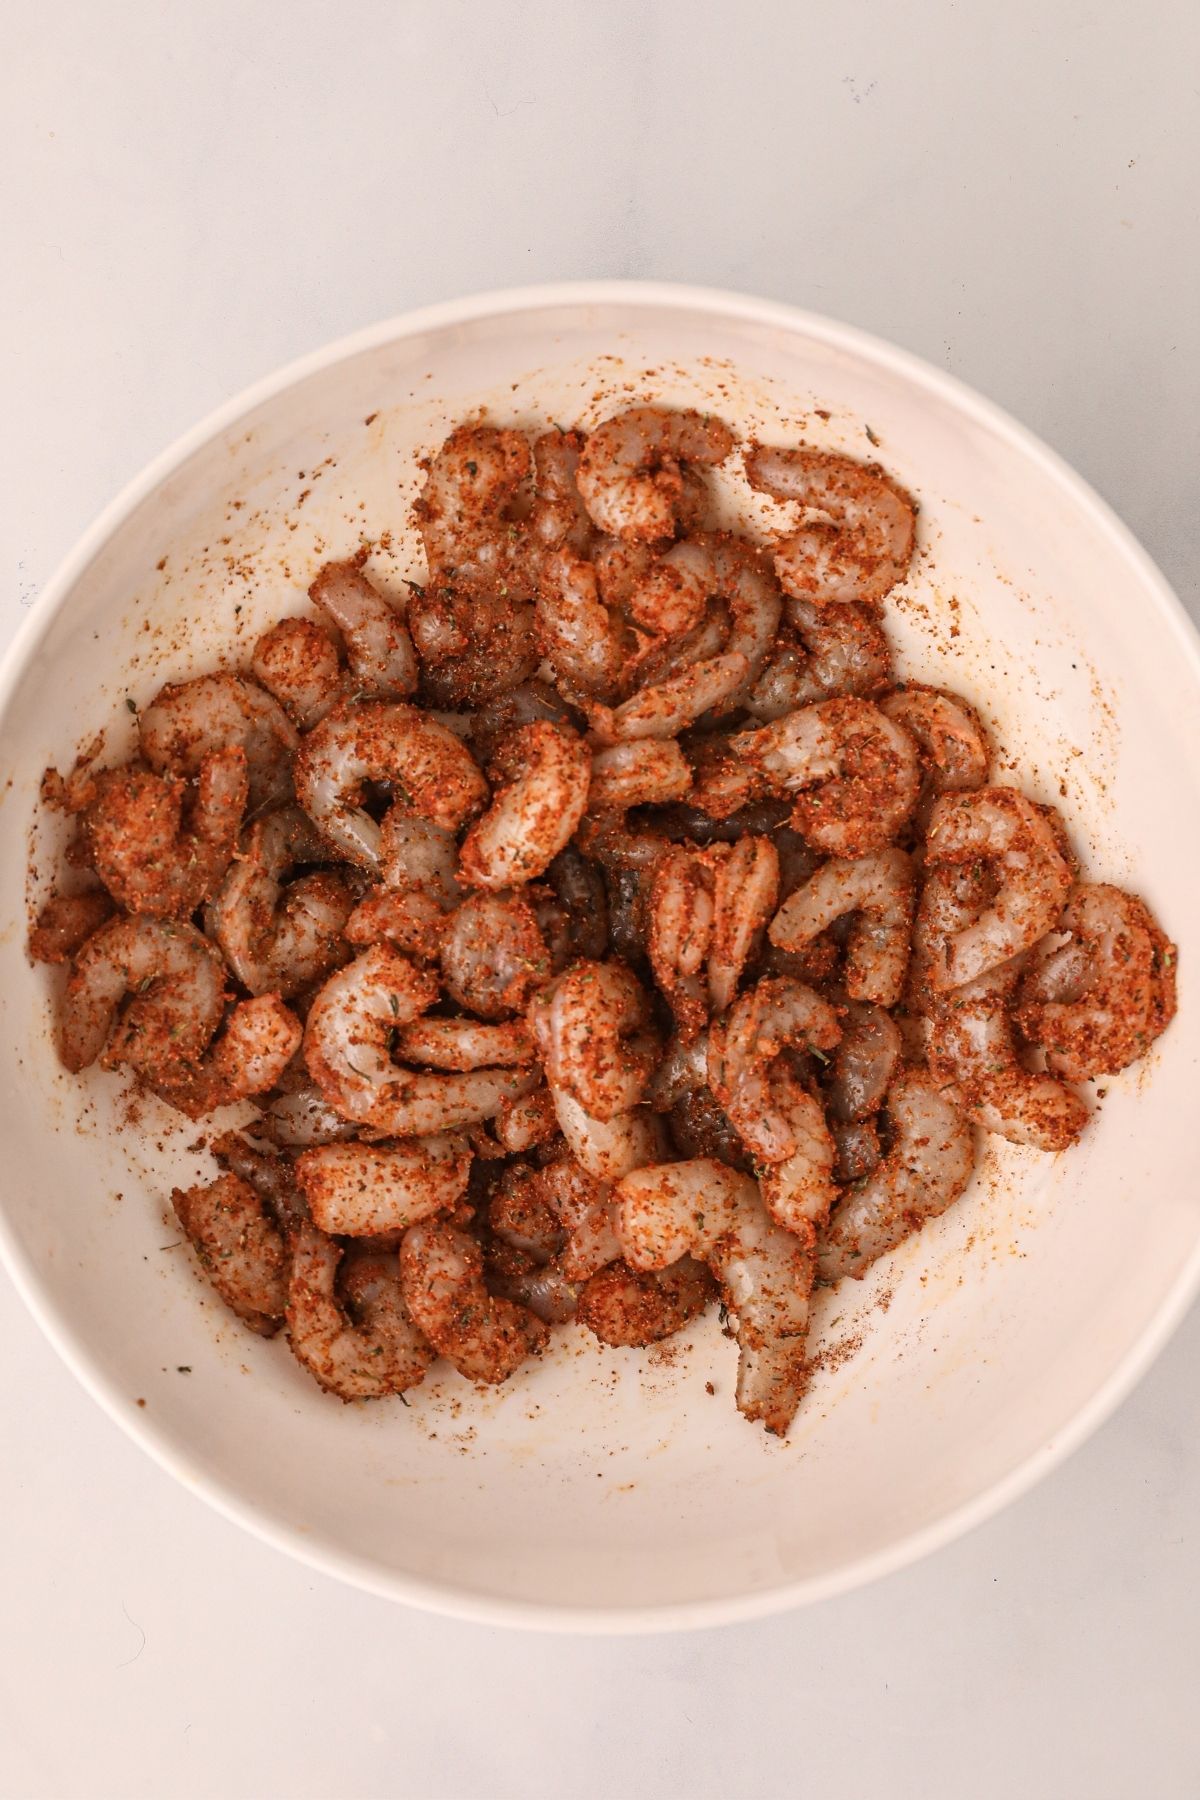 Uncooked shrimp in a white bowl tossed with seasonings before being cooked in the air fryer